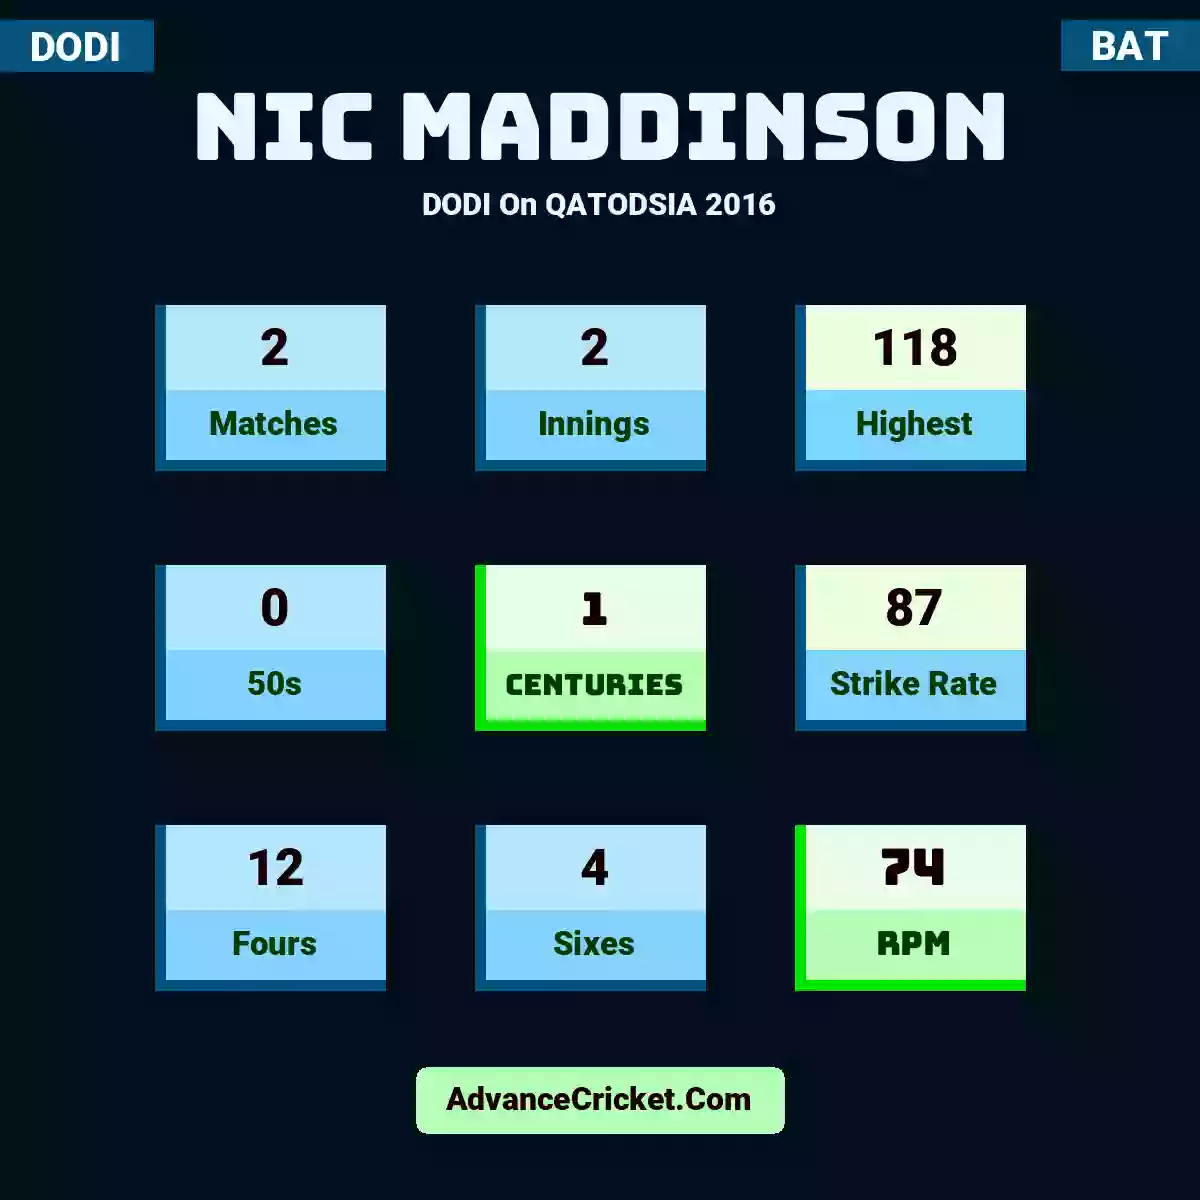 Nic Maddinson DODI  On QATODSIA 2016, Nic Maddinson played 2 matches, scored 118 runs as highest, 0 half-centuries, and 1 centuries, with a strike rate of 87. N.Maddinson hit 12 fours and 4 sixes, with an RPM of 74.